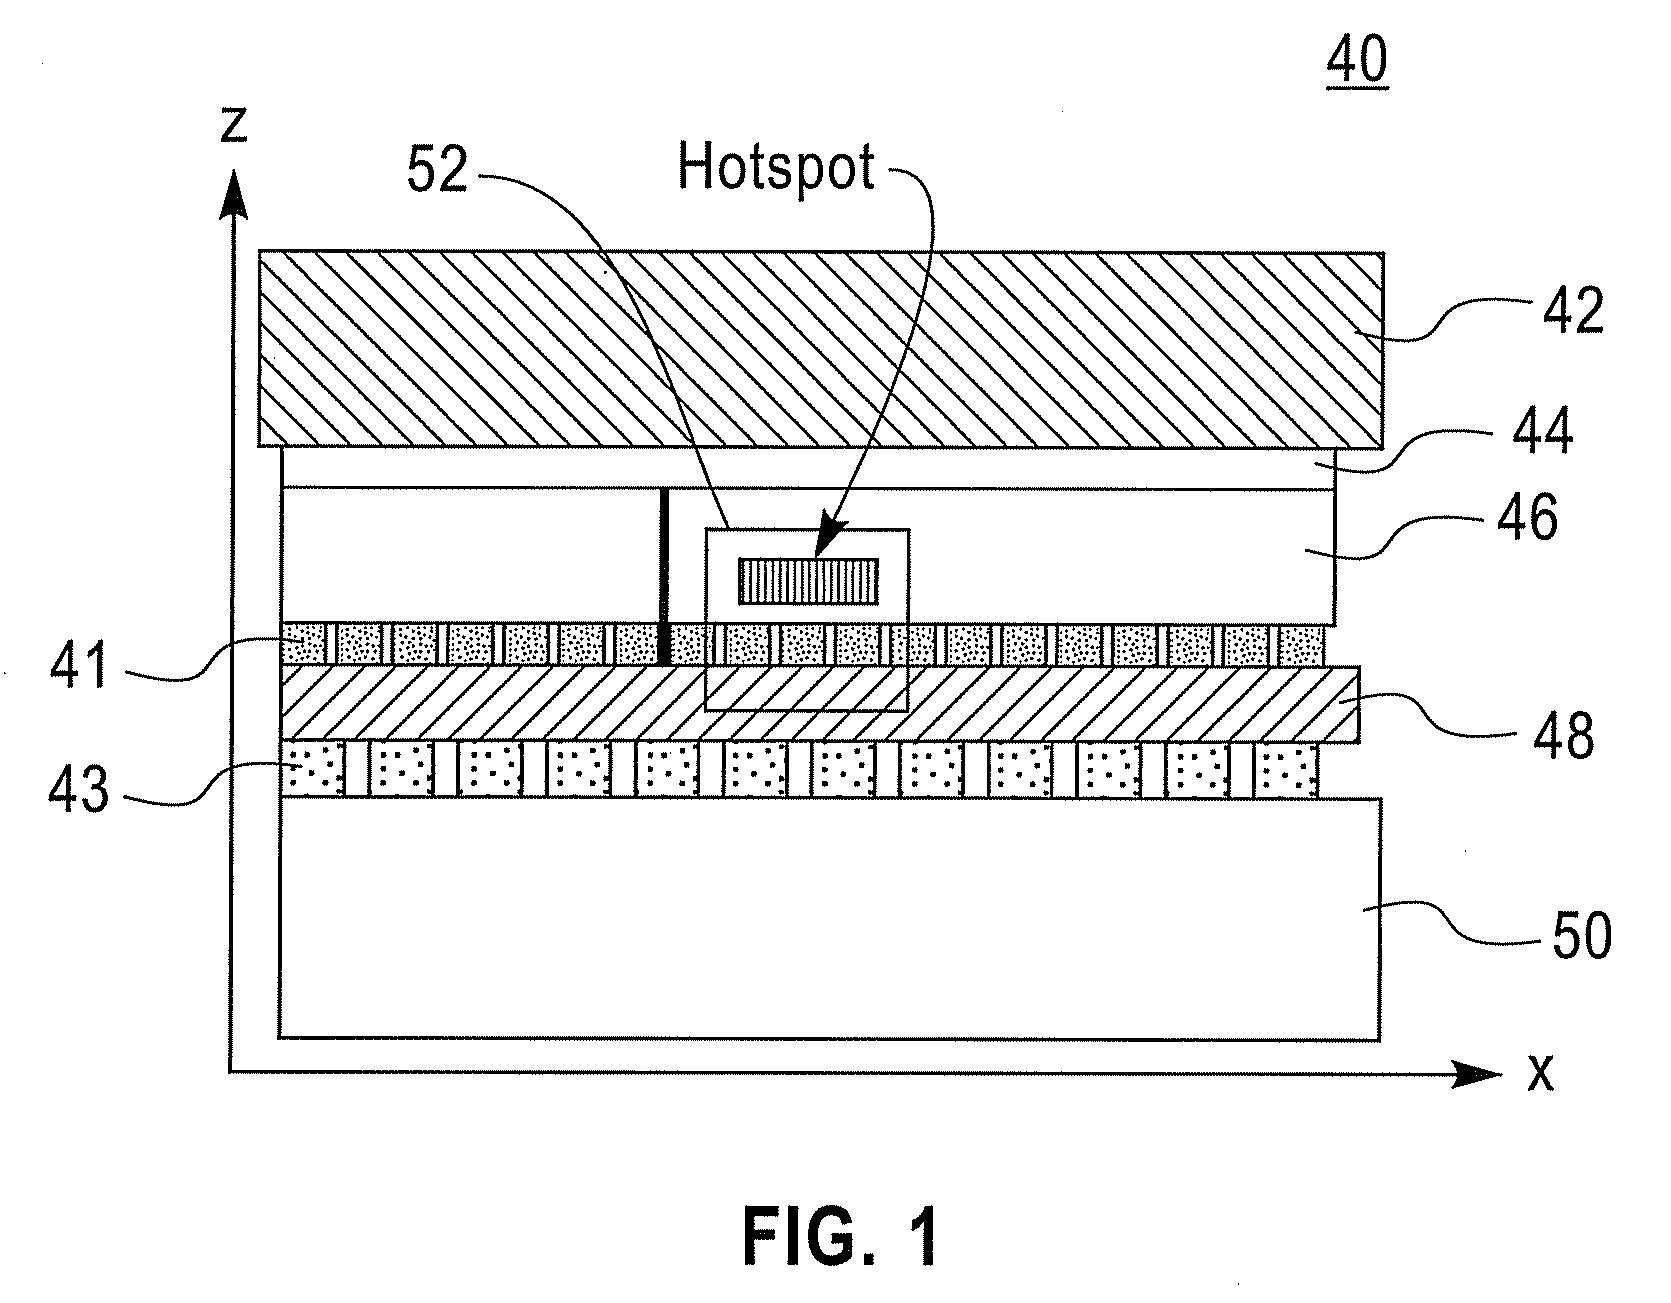 Method to enhance micro-c4 reliability by reducing the impact of hot spot pulsing